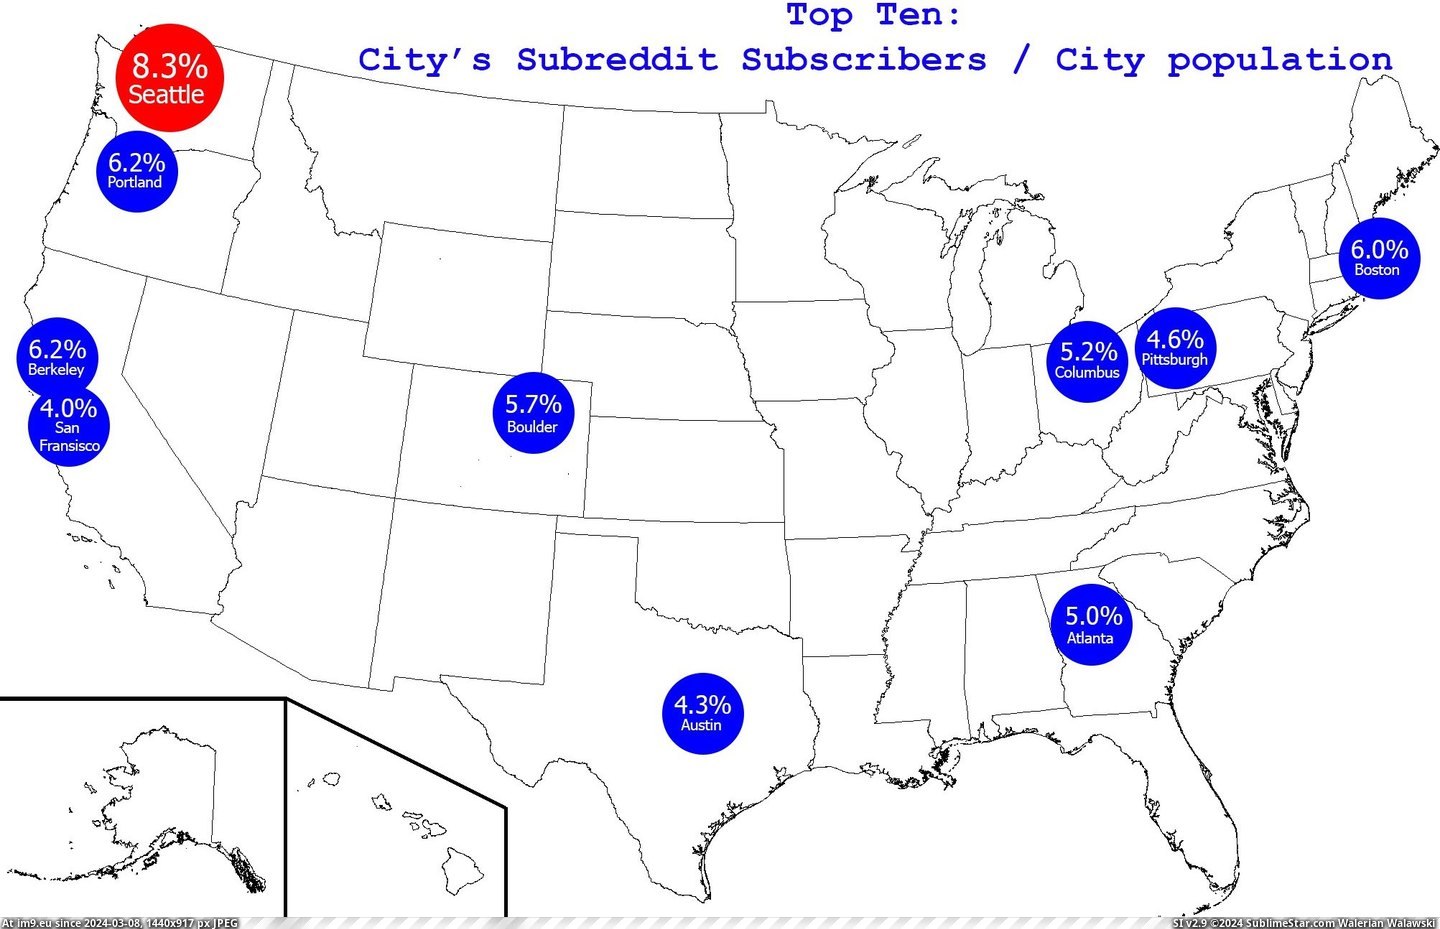 #City #Data #Subscribed #Population [Dataisbeautiful] How Much of a City's Population is Subscribed to Its Subreddit (More data in comments) [OC] Pic. (Obraz z album My r/DATAISBEAUTIFUL favs))